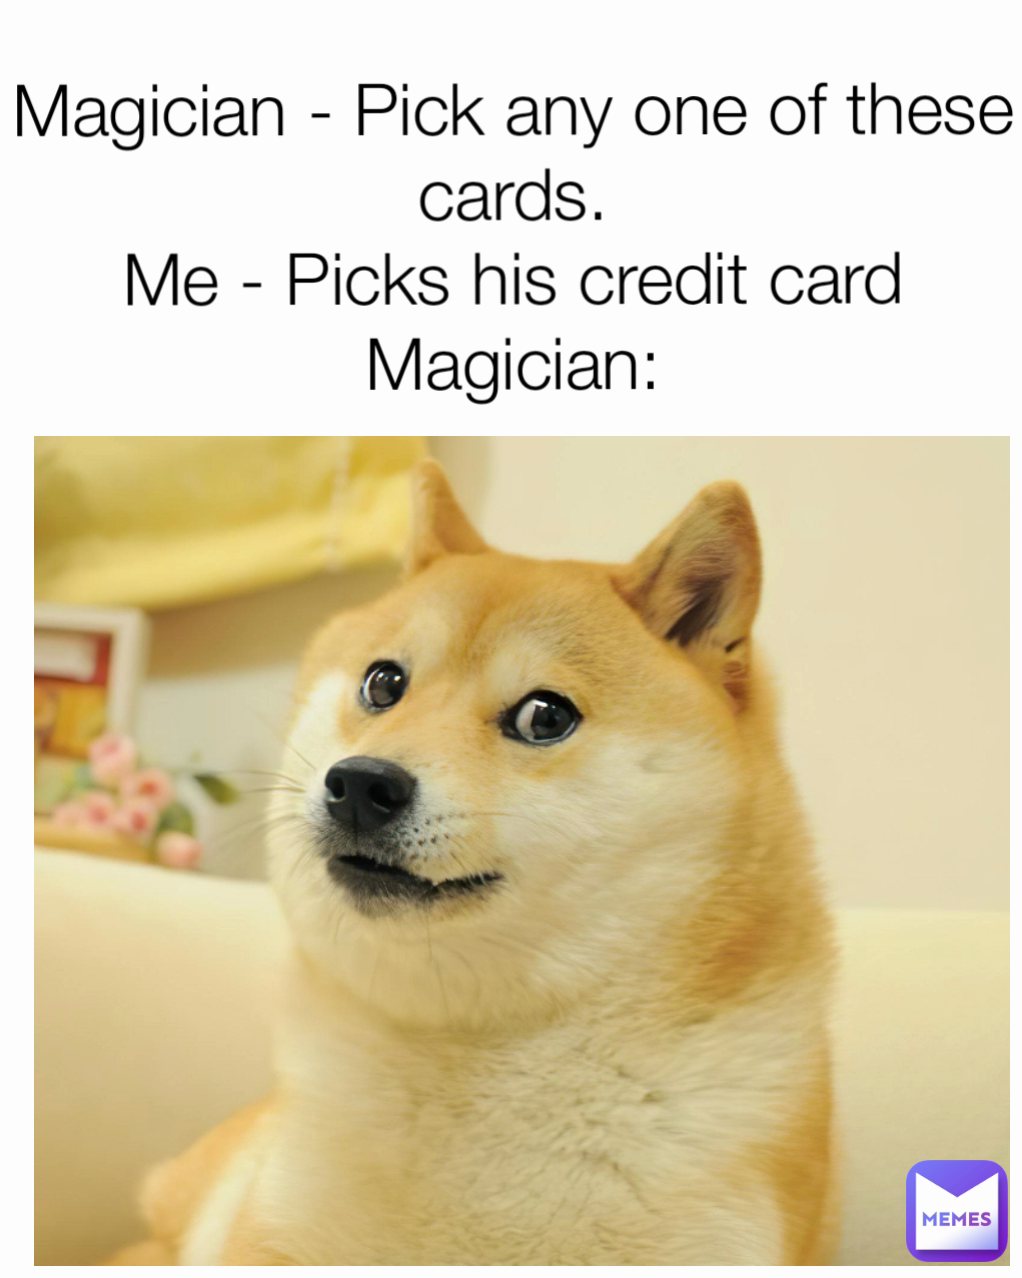 Magician - Pick any one of these cards.
Me - Picks his credit card
Magician: